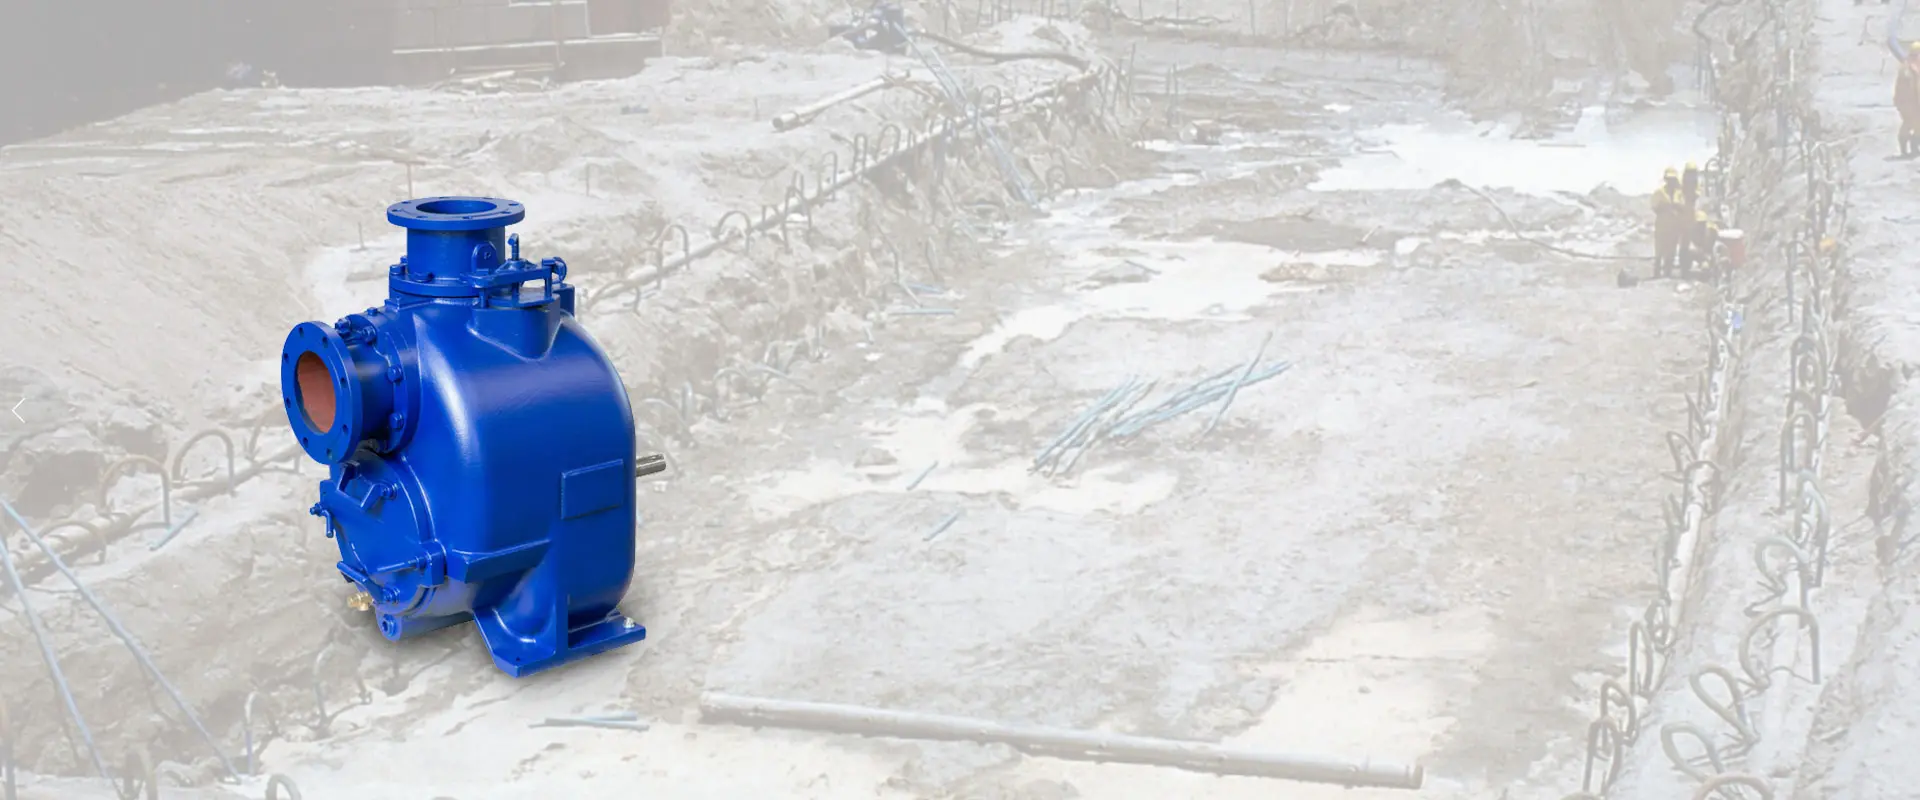 A Trusted Industrial Pumps Manufacturer